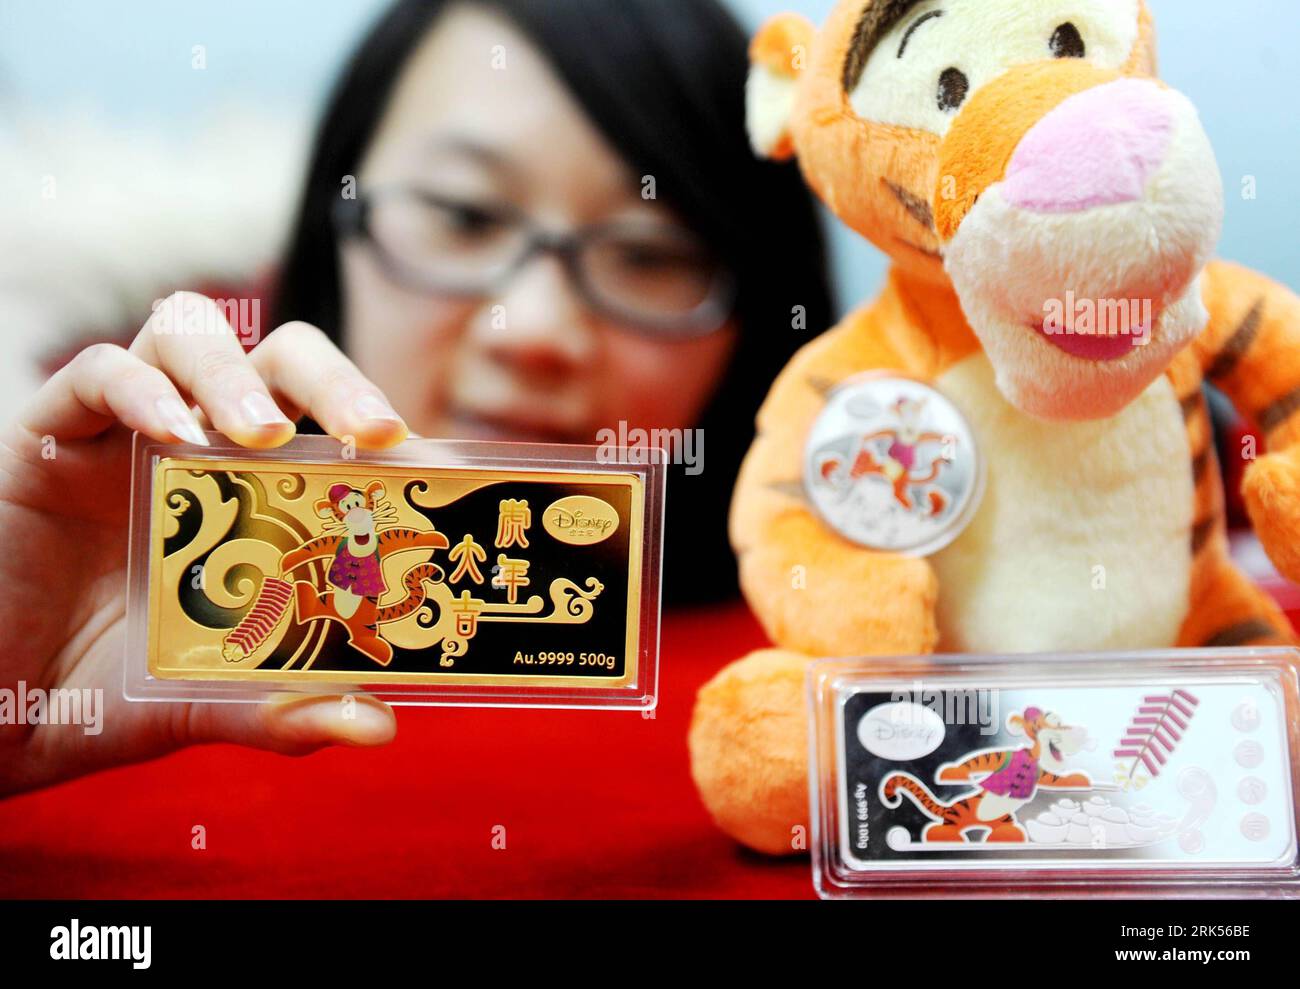 Bildnummer: 53711111  Datum: 07.01.2010  Copyright: imago/Xinhua (100107) -- BEIJING, Jan. 7, 2010 (Xinhua) -- A salesclerk shows gold and silver bars featuring Disney cartoon character Tigger from Winnie the Pooh at a shop in Beijing, capital of China, Jan. 7, 2010. A series of gold and silver Tigger collection were issued recently, to mark the coming Year of Tiger according to the Chinese traditional lunar calendar. (Xinhua) (wqq) (1)CHINA-BEIJING-YEAR OF TIGER-TIGGER FROM WINNIE THE POOH-GOLD AND SILVER COLLECTION (CN) PUBLICATIONxNOTxINxCHN Jahr Tiger Objekte kbdig xcb 2010 quer o0 Teddy K Stock Photo